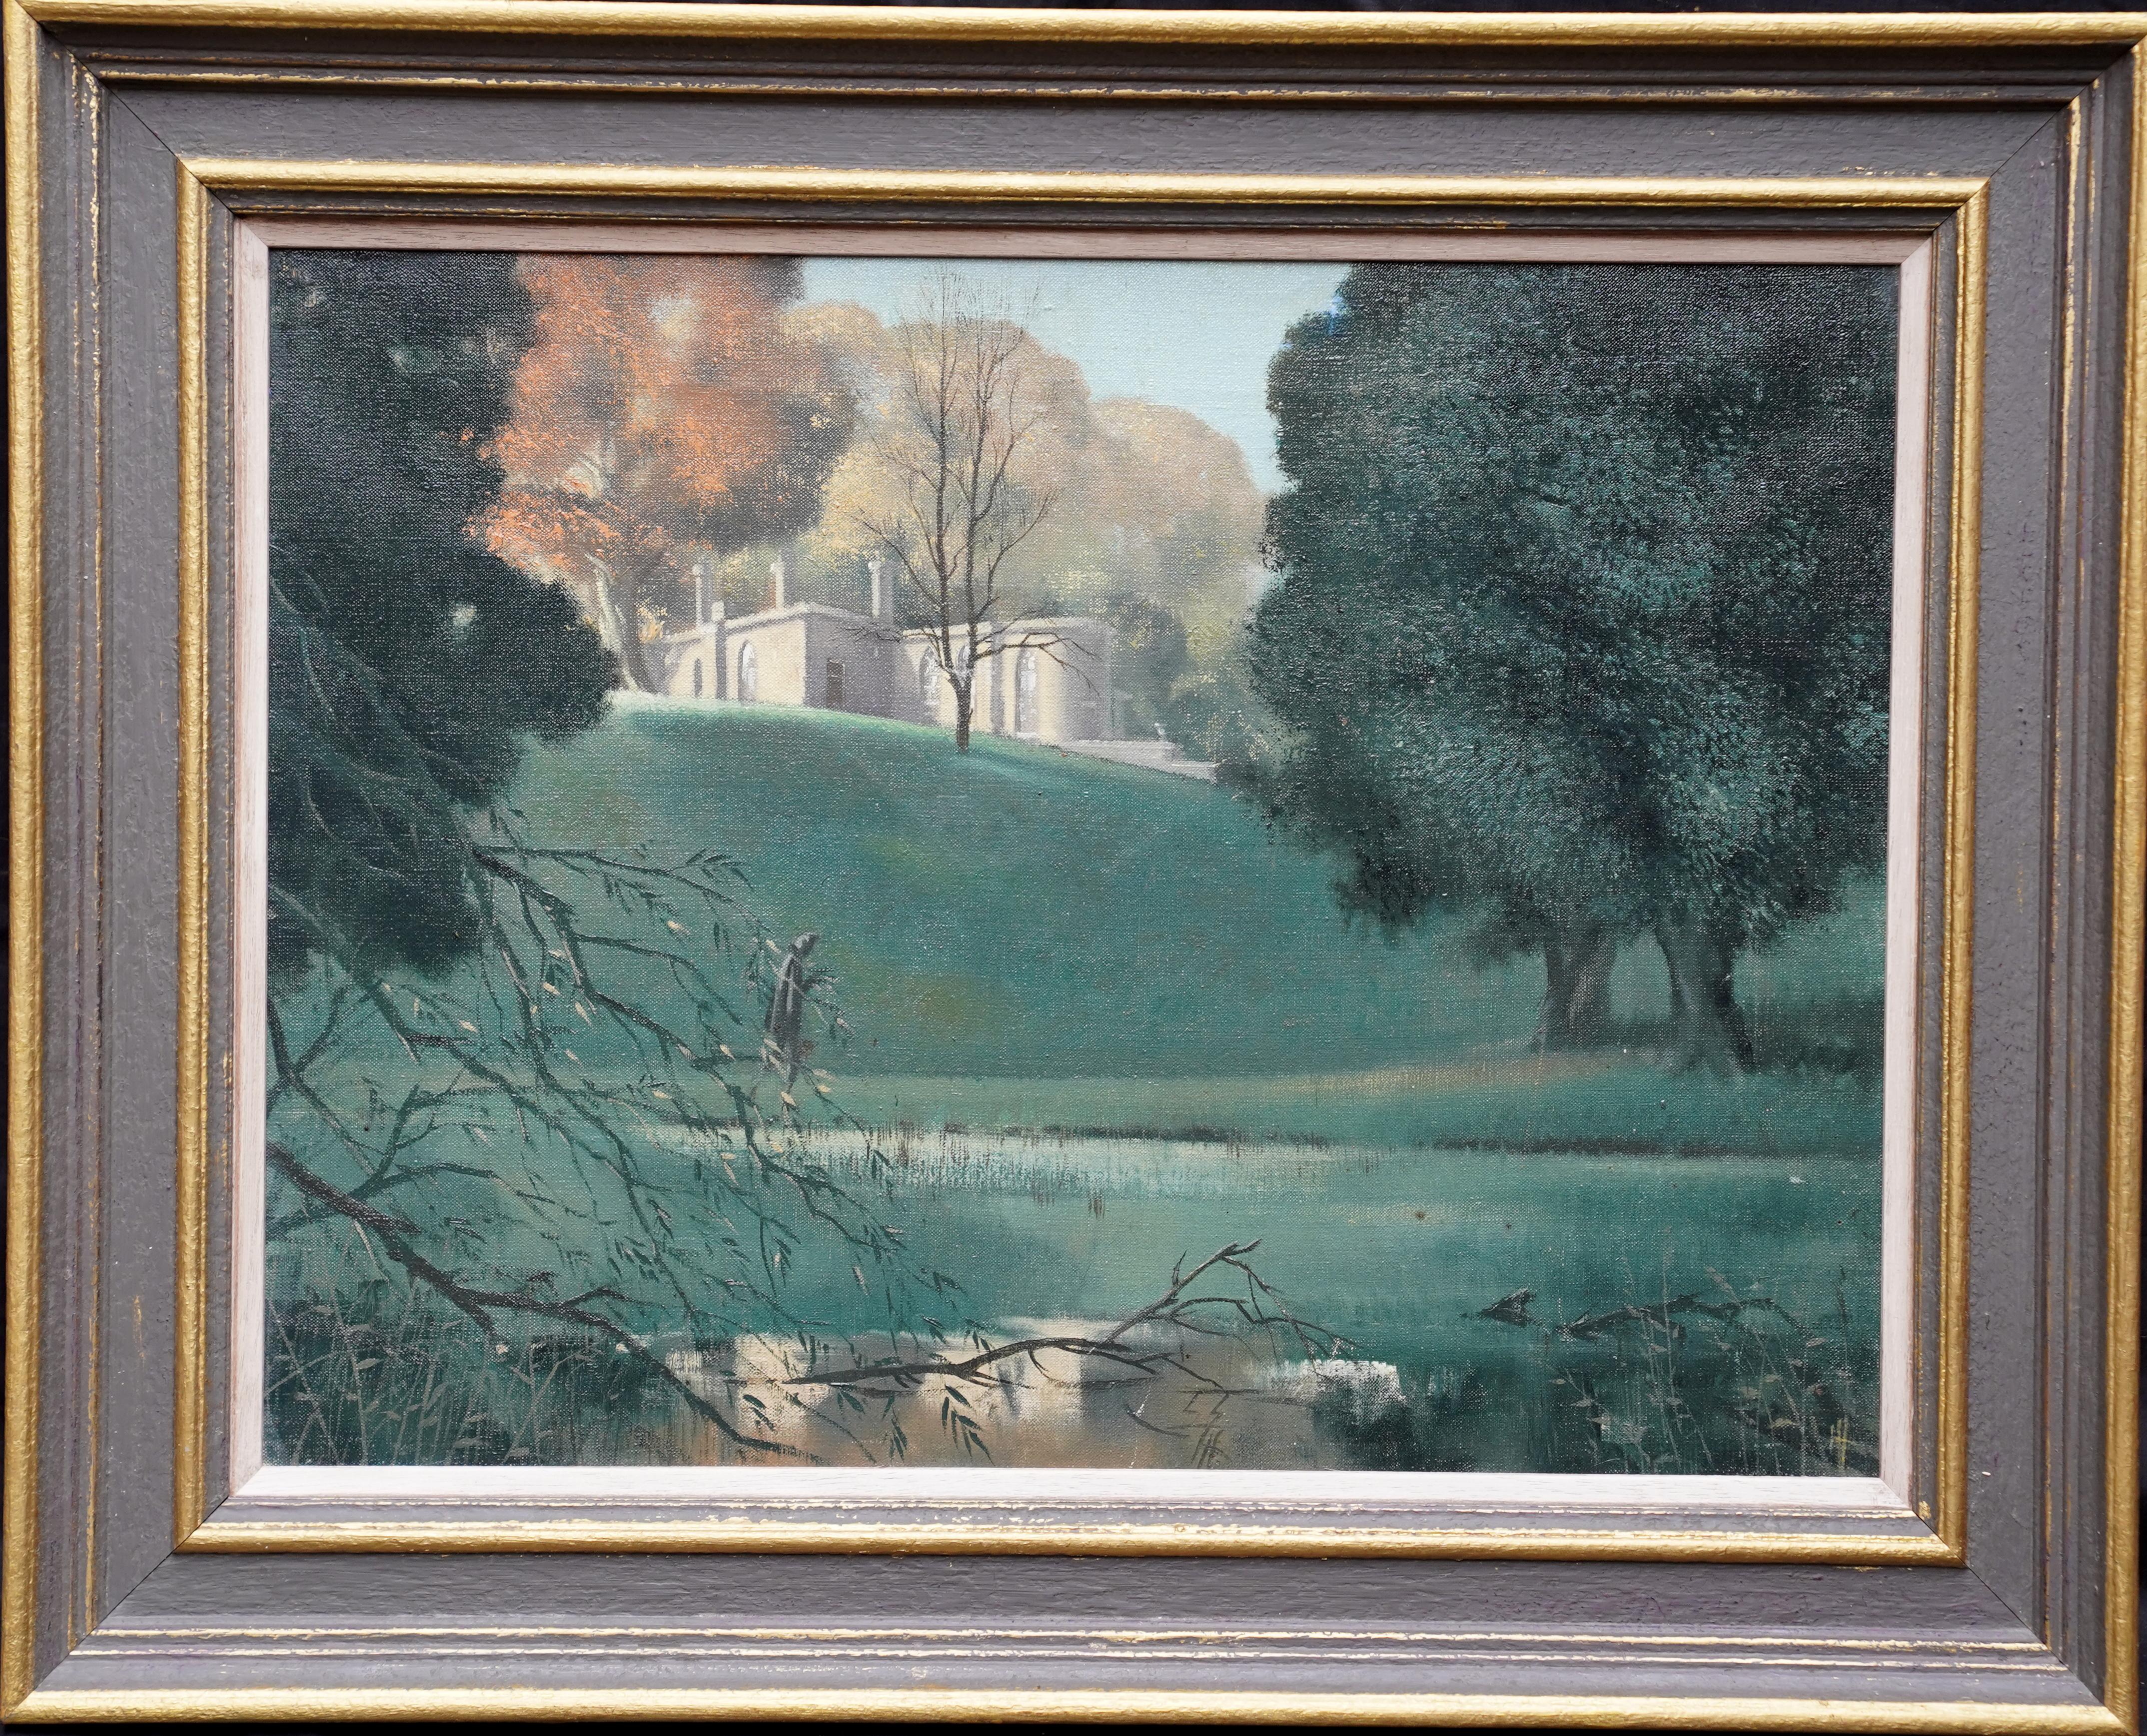 Laurence Henry Irving Landscape Painting - Garden Landscape - British fifties country house landscape oil painting